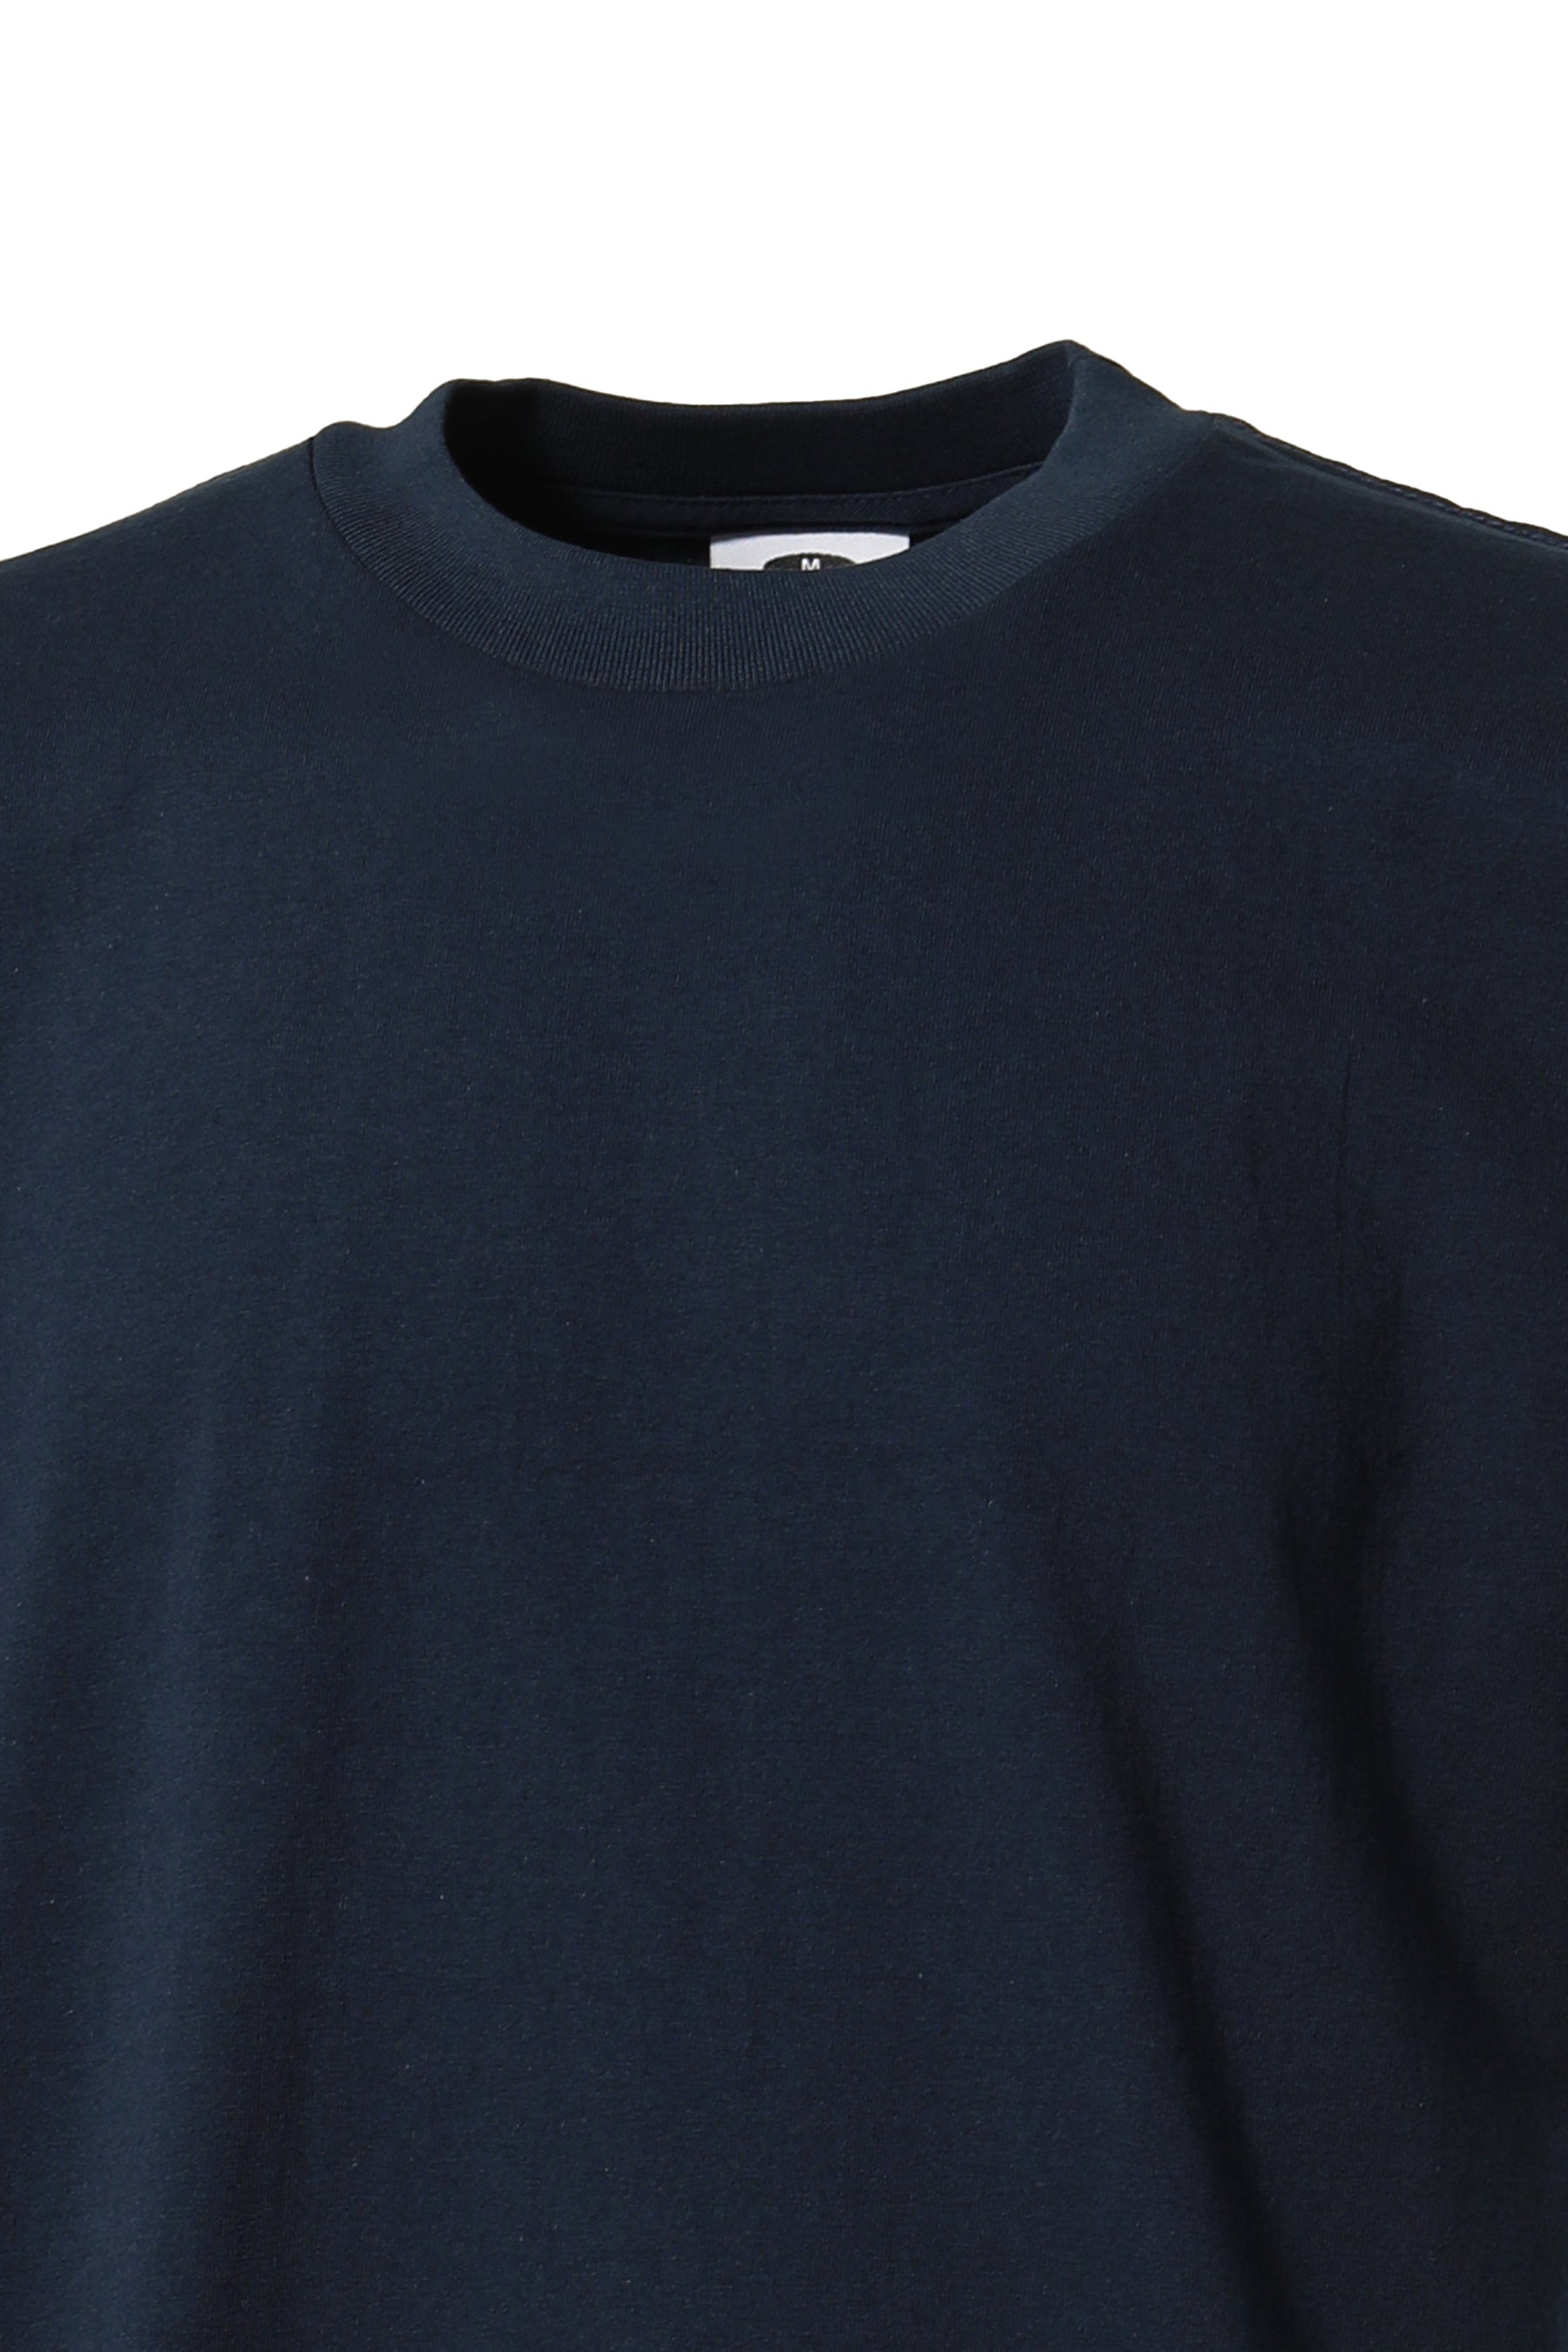 HEAVY WEIGHT CREWNECK T-SHIRT / NVY